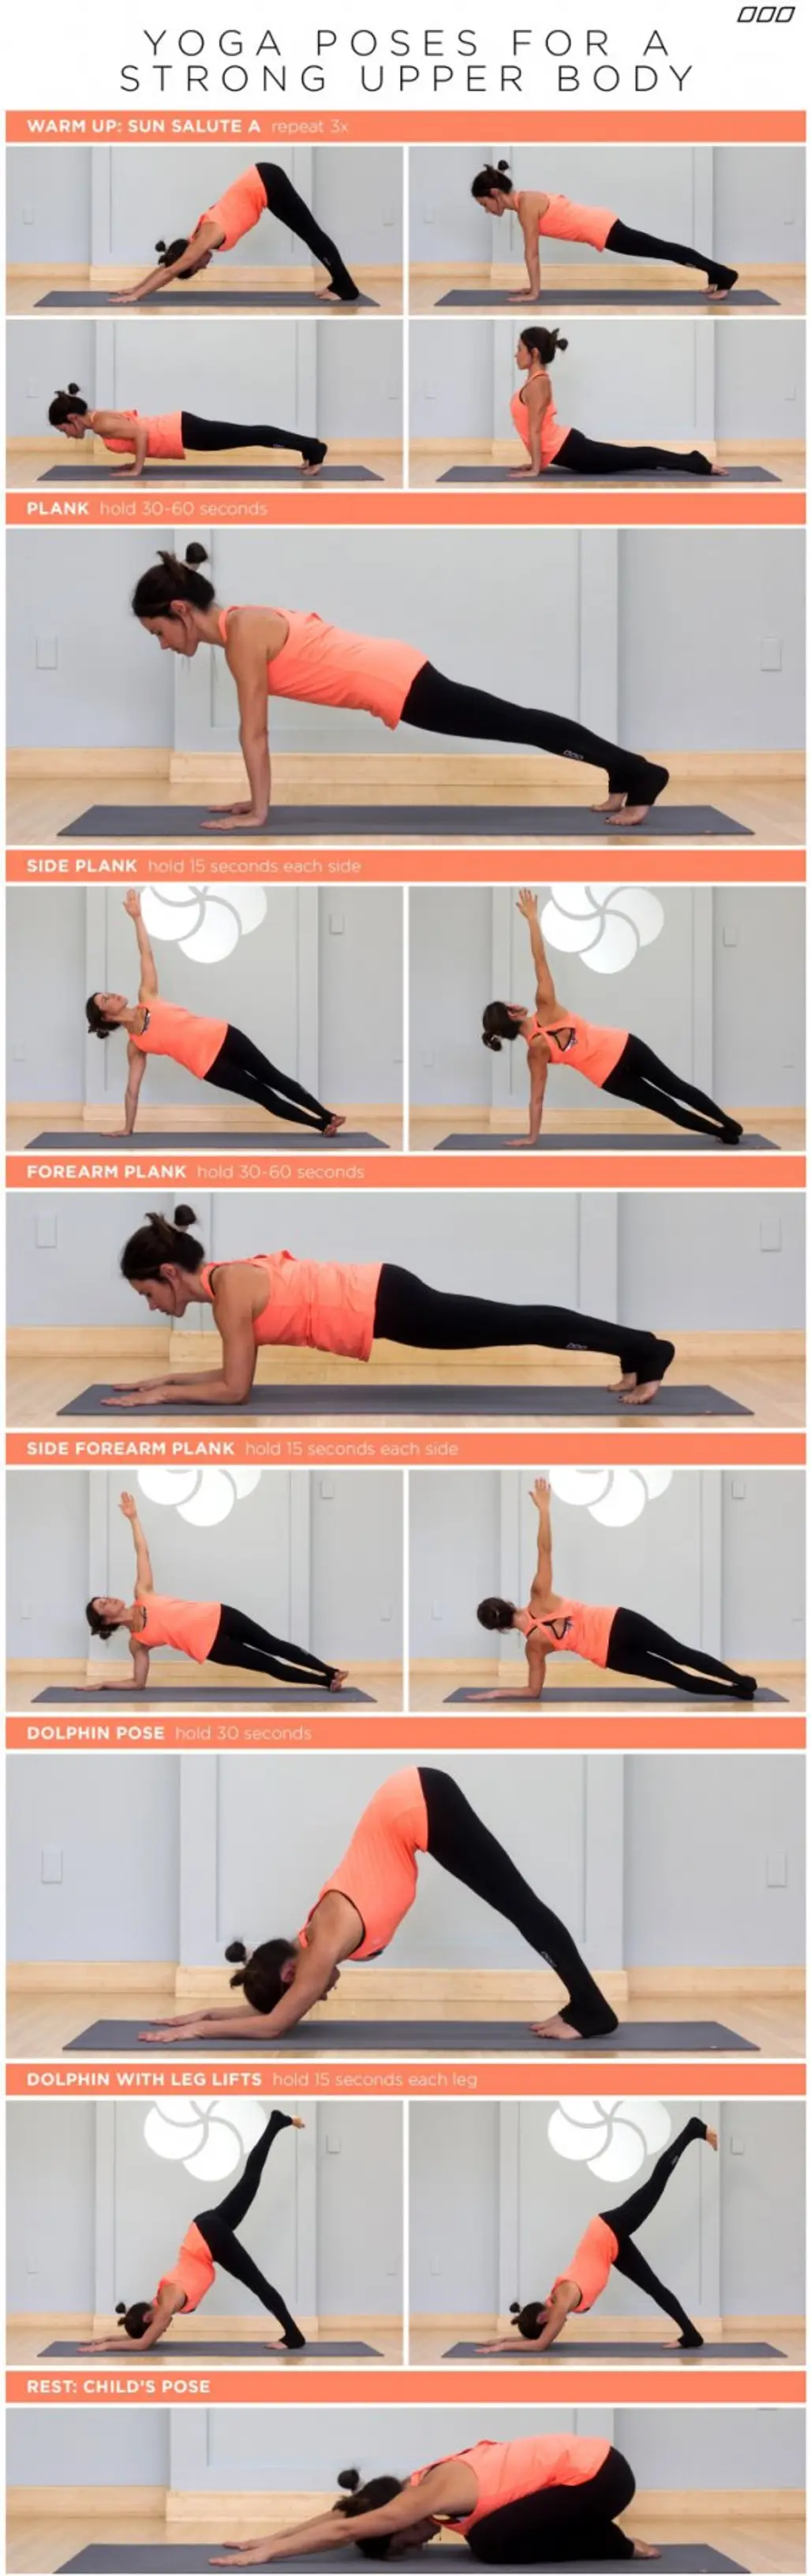 Yoga Poses for Your Upper Body